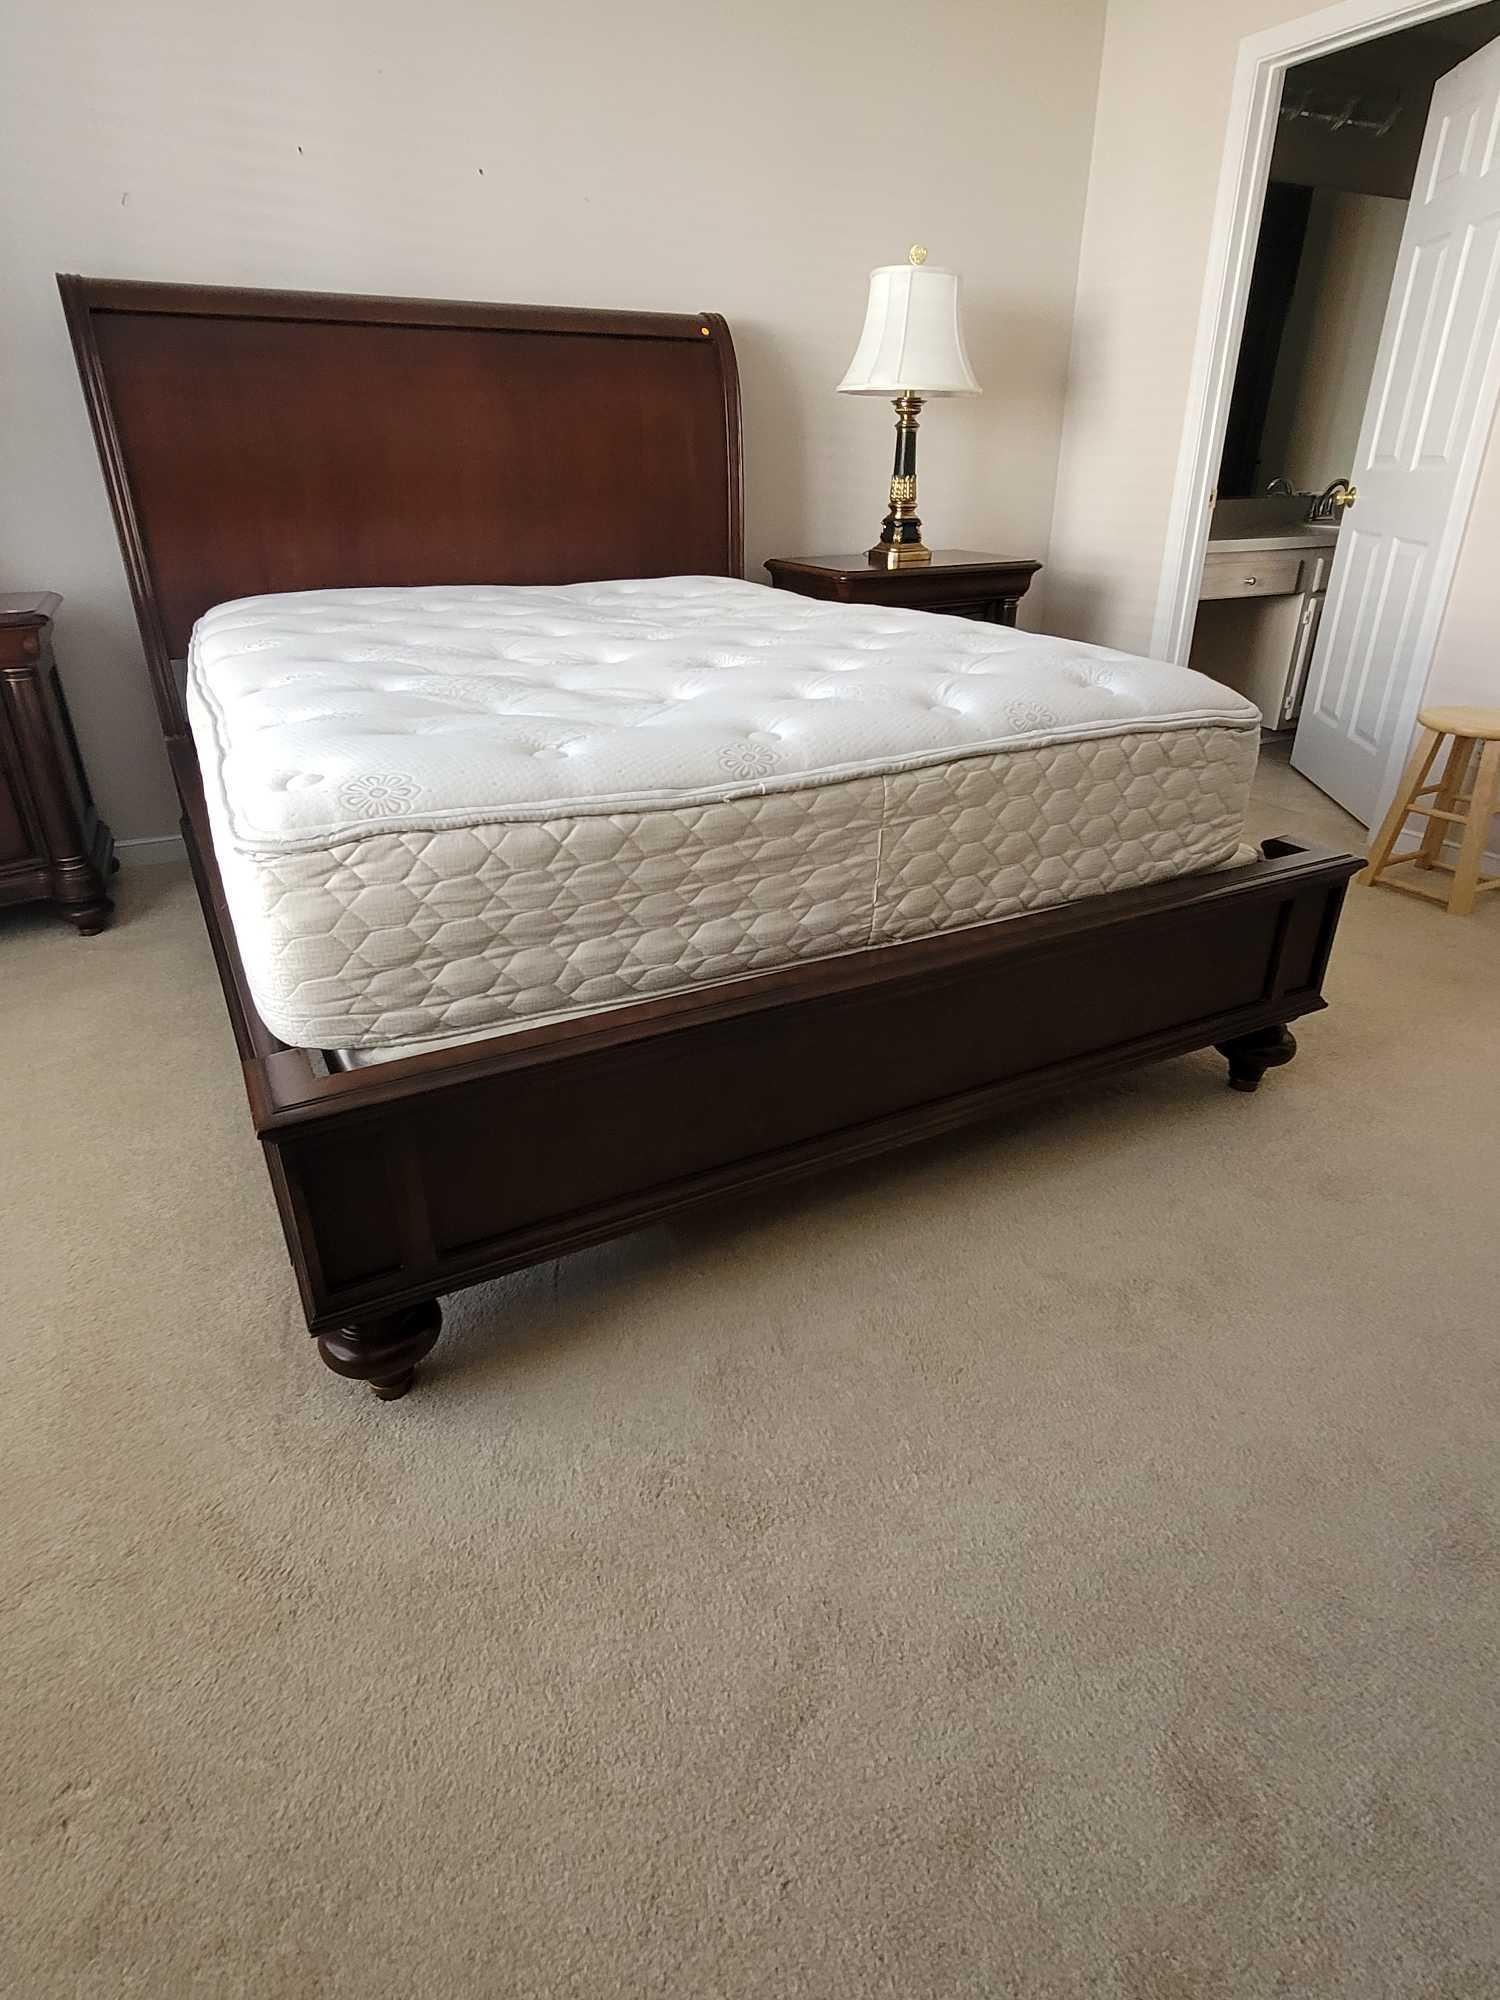 (MBR) DREXEL QUEEN SIZE BED WITH SLEIGH STYLE HEADBOARD AND BOX FRAME. MEASURES APPROX 67" X 90" X